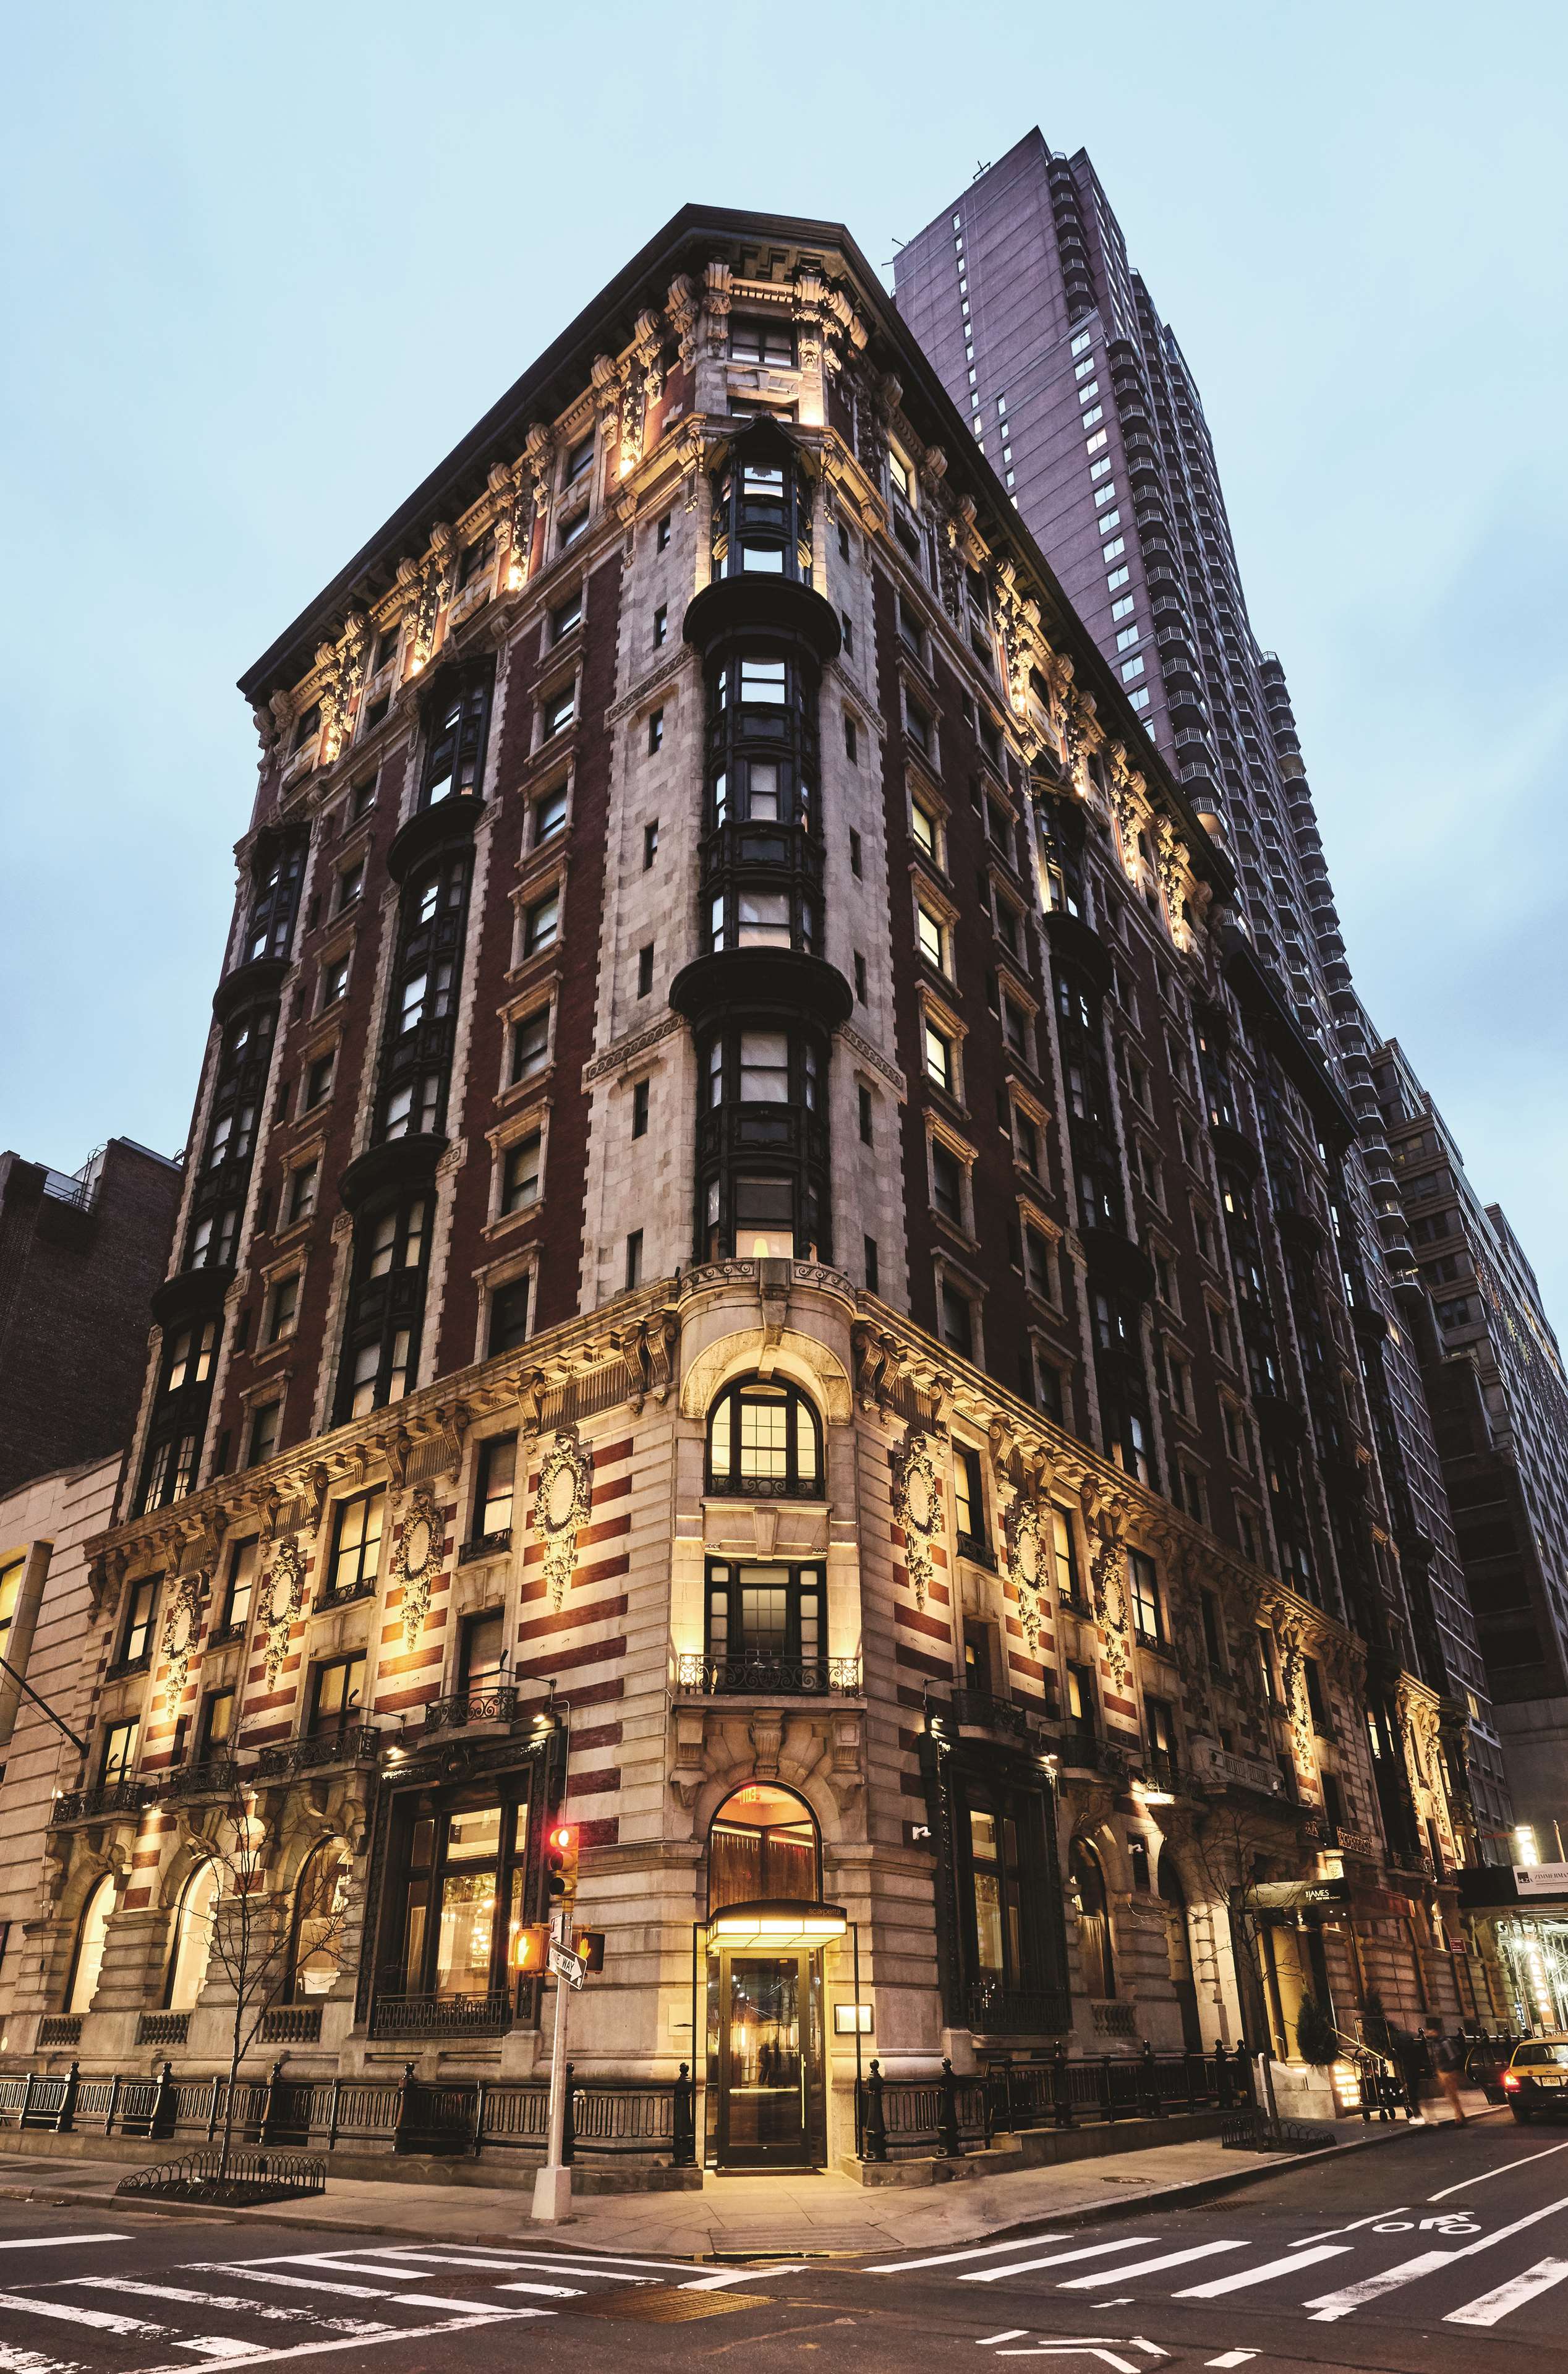 The James New York - NoMad